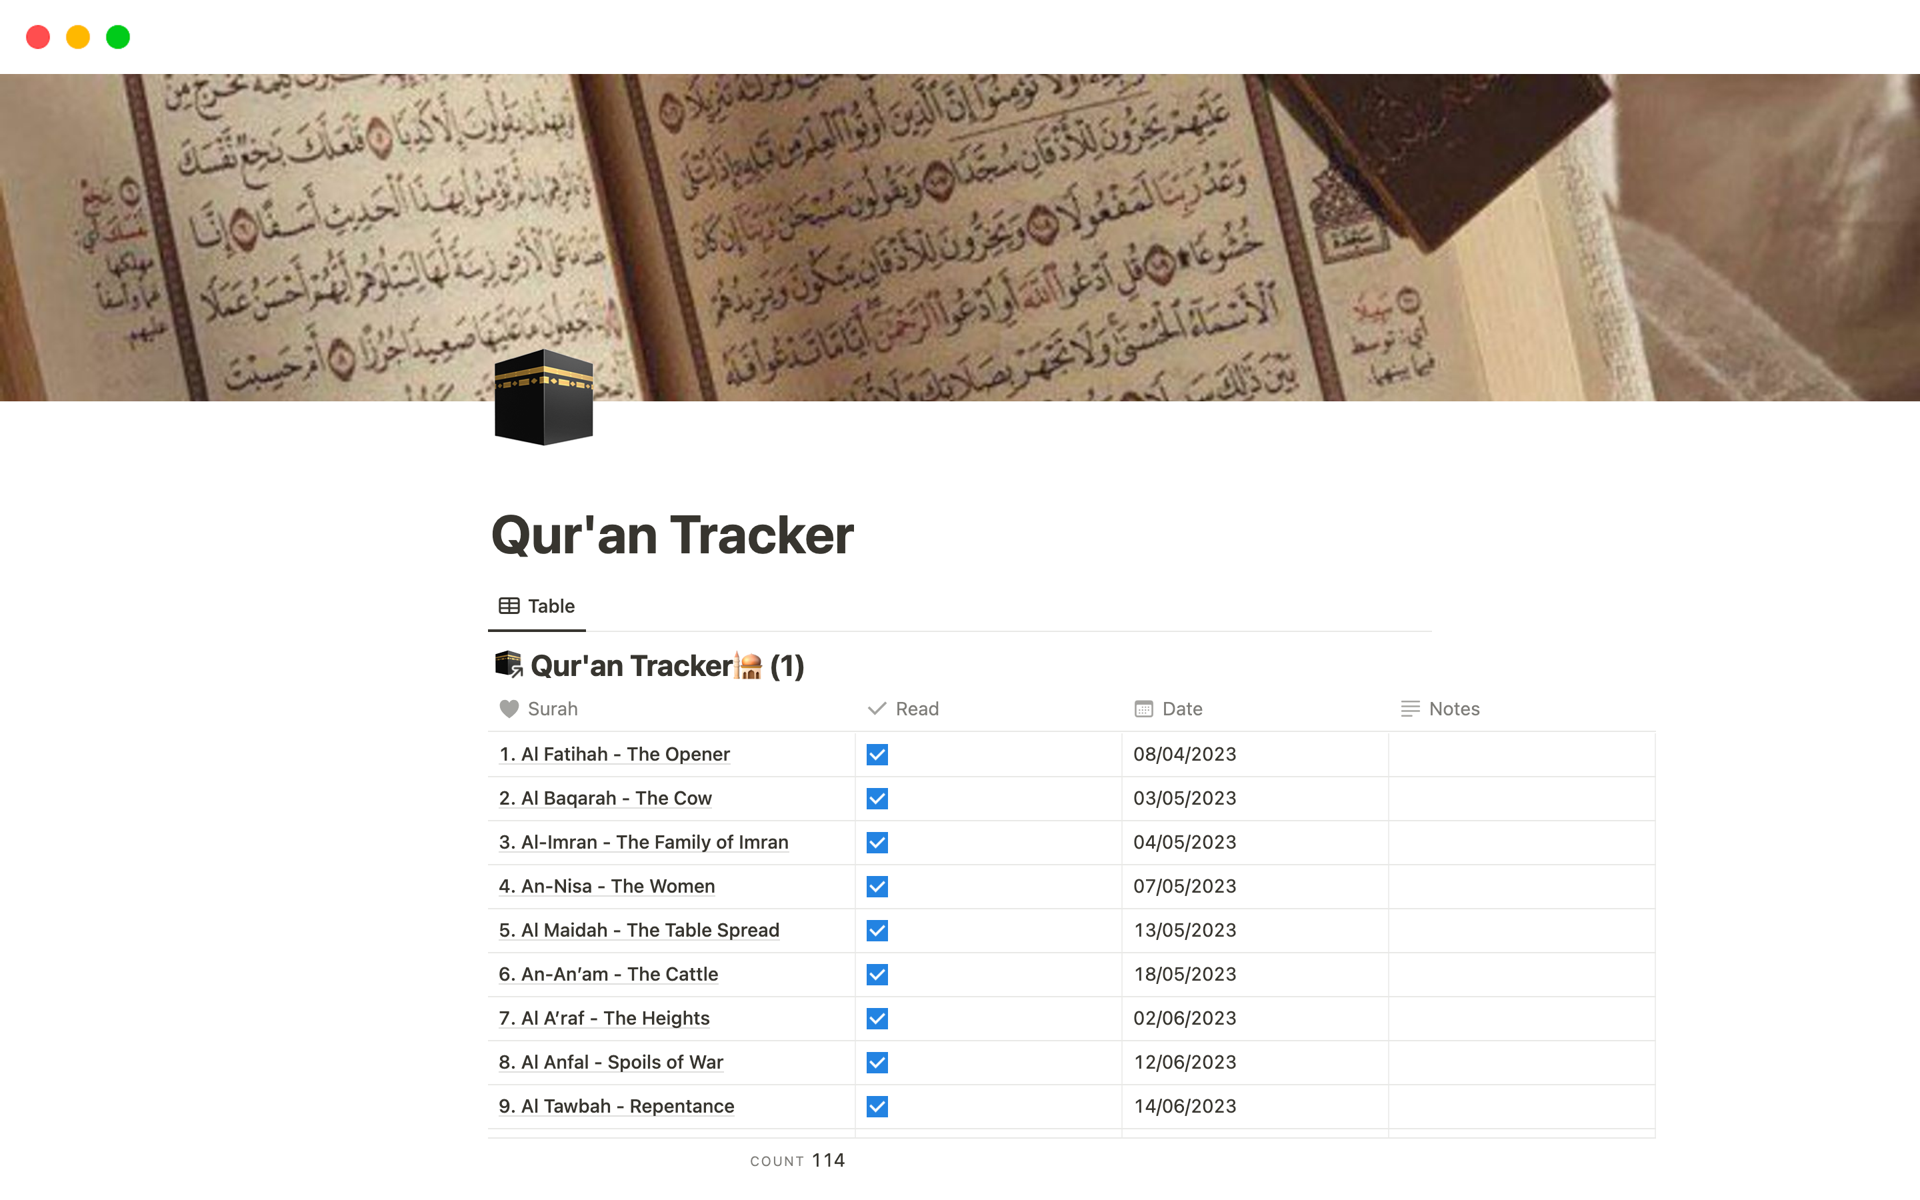 Allows you to track surahs you have read 